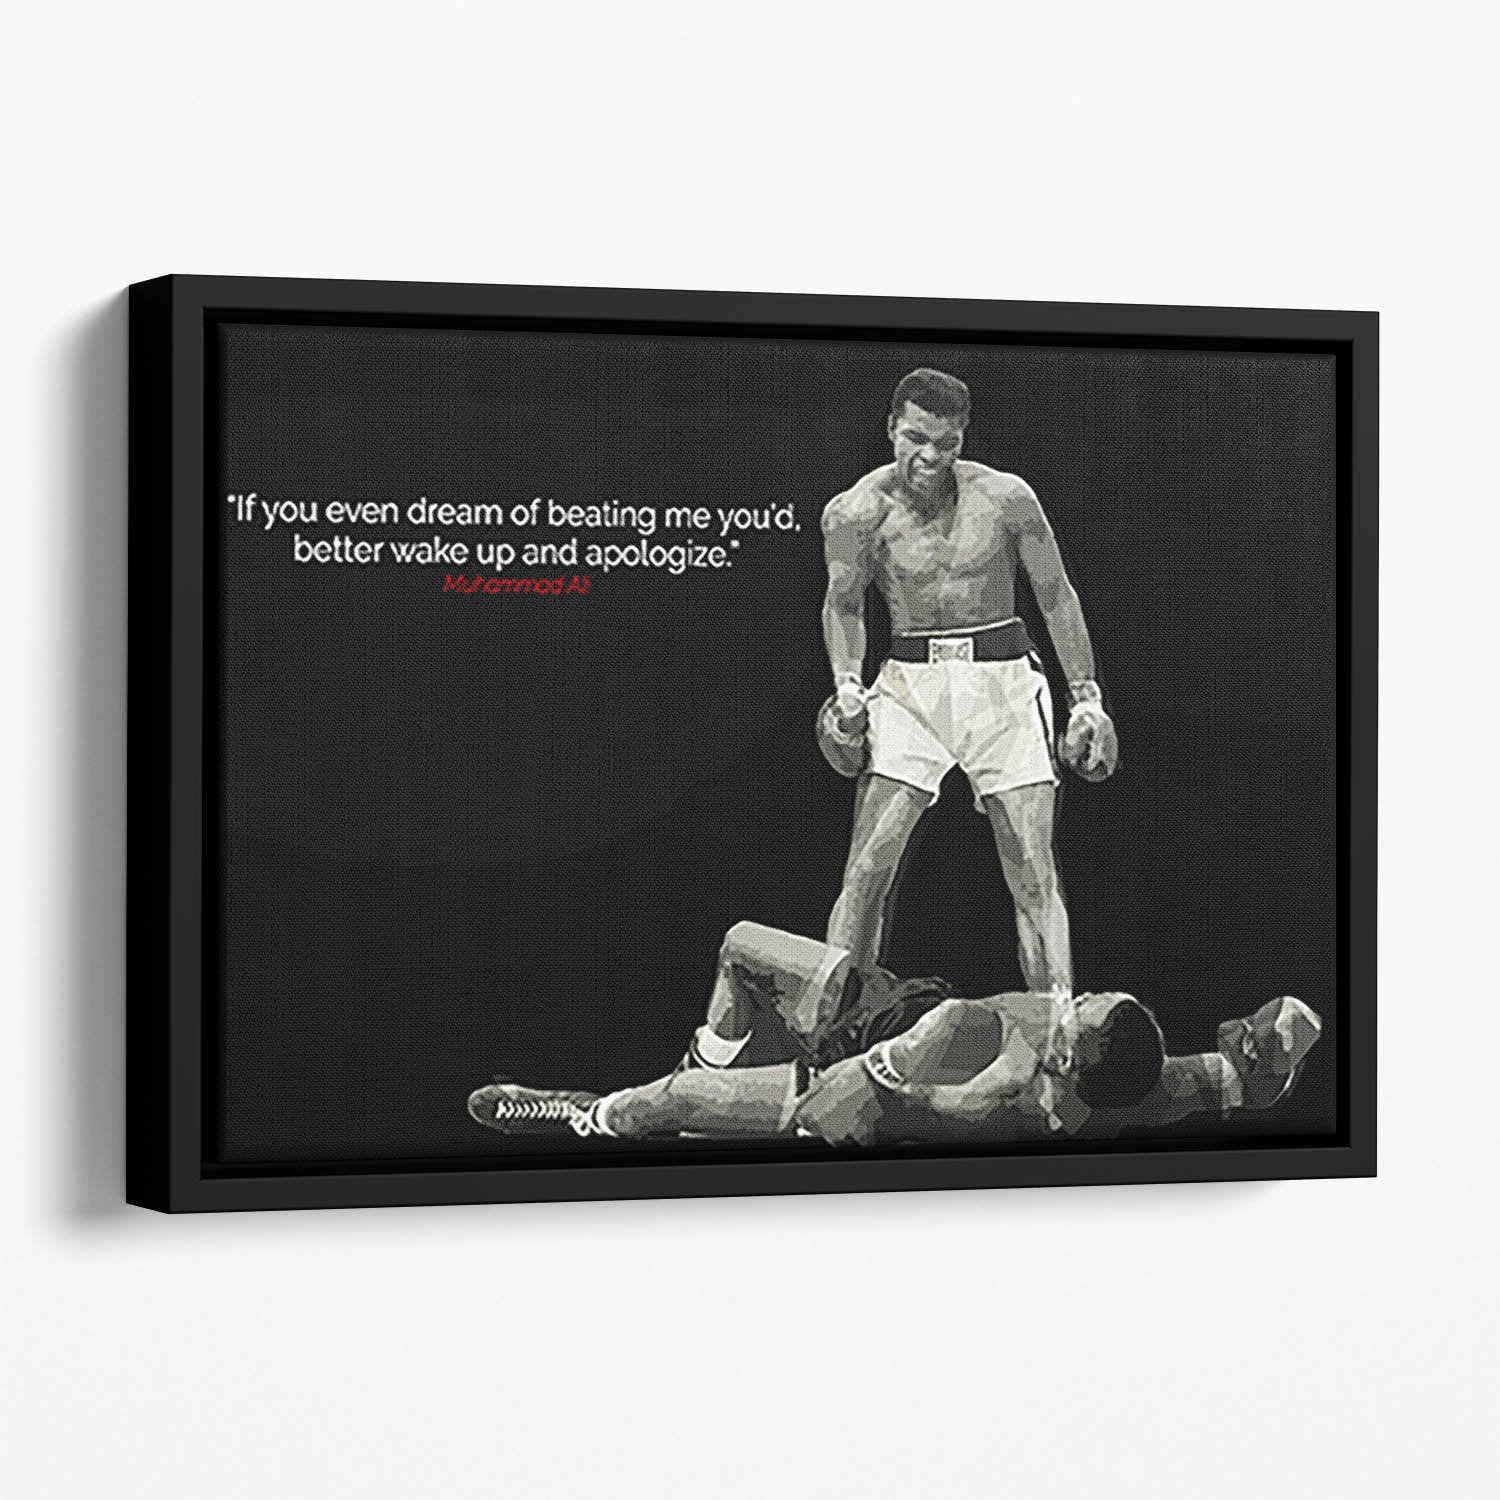 Muhammad Ali Dream Of Beating Me Floating Framed Canvas